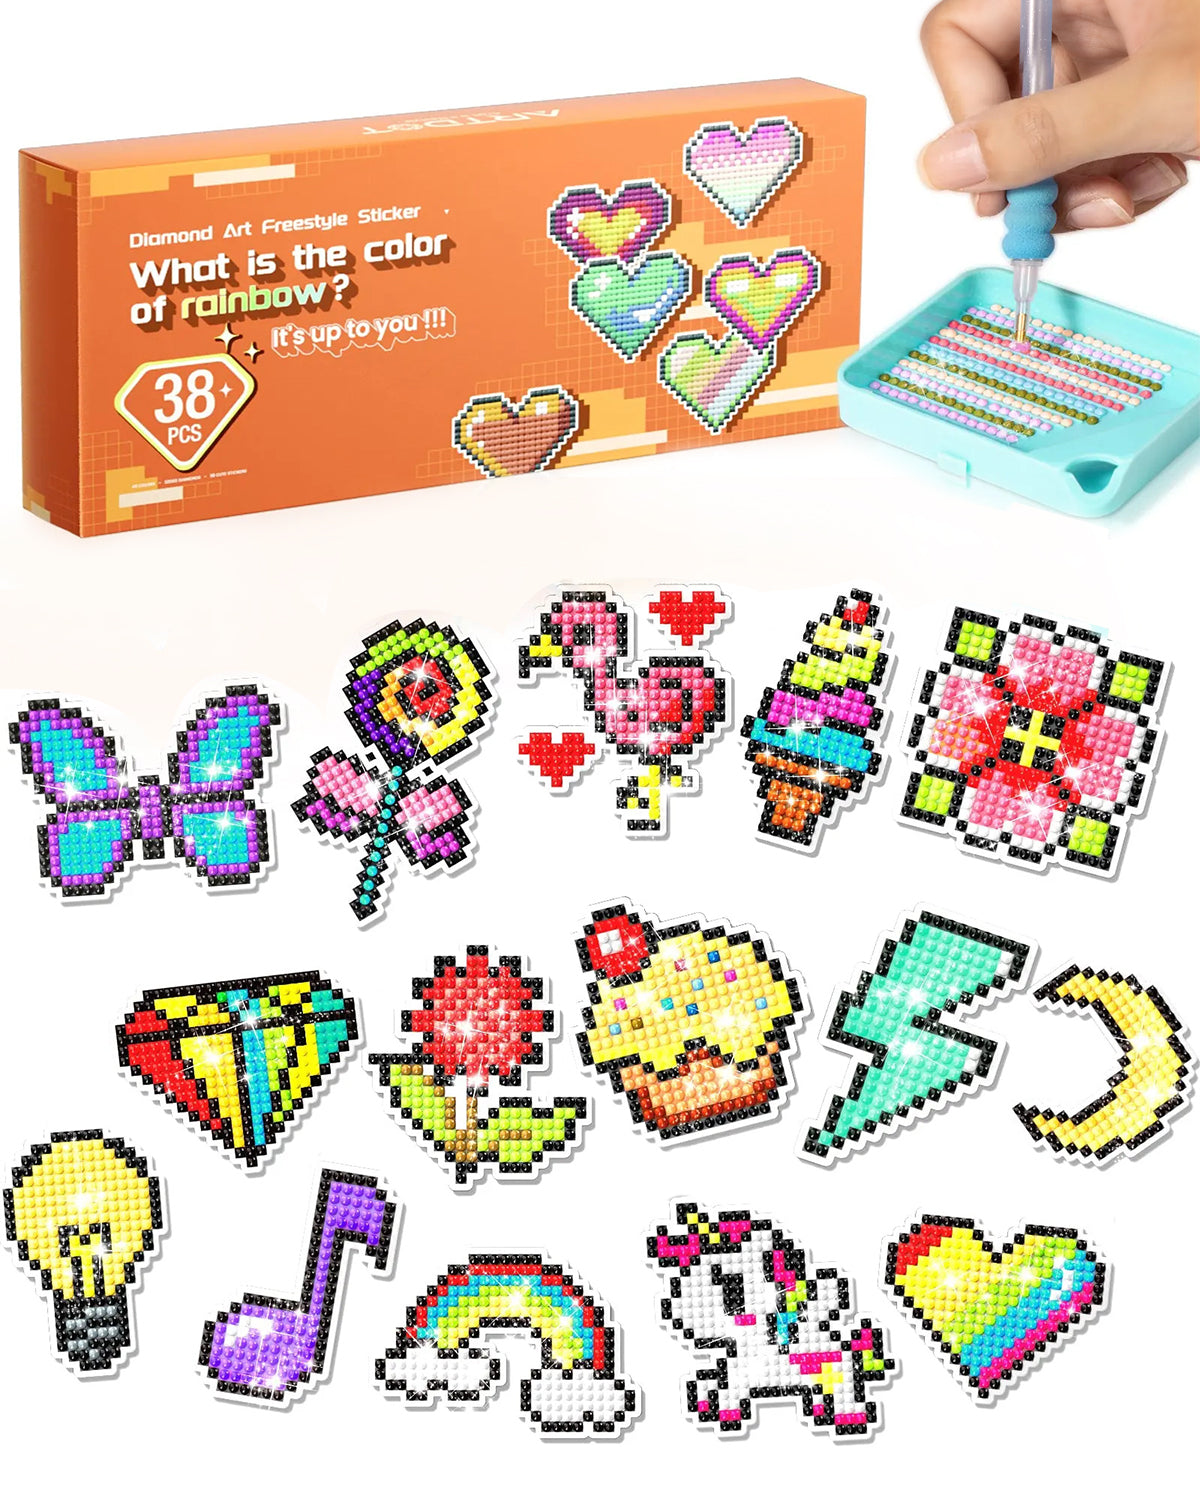 Feel 'n Peel Stickers: Point Symbols (over 1,200 stickers)